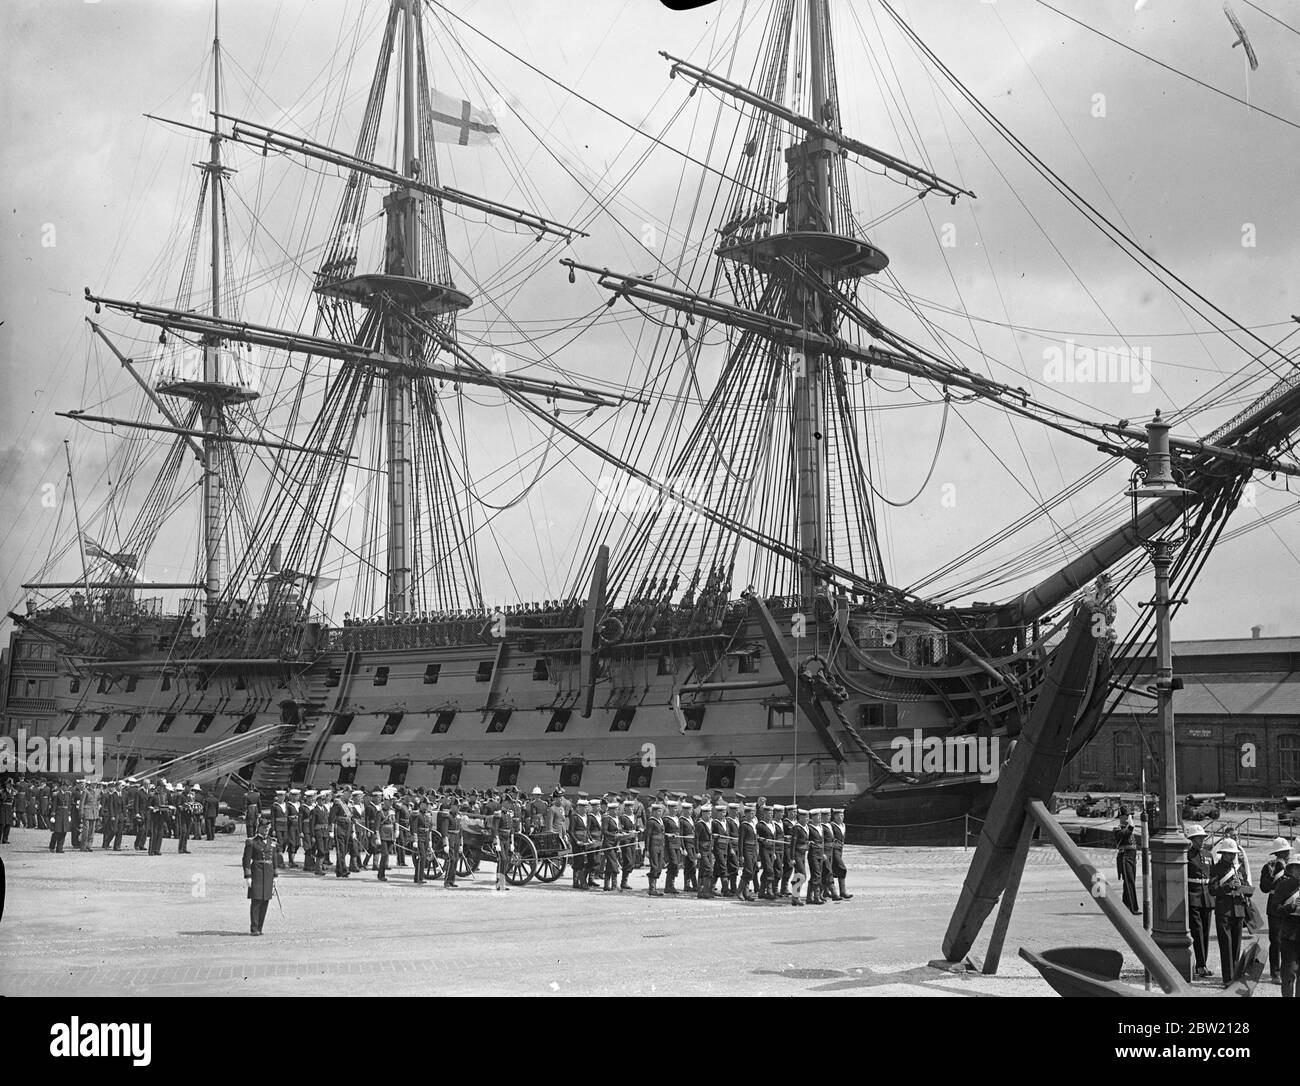 With full naval honours, the body of Admiral Sir William Fisher, former Commander-in-Chief at Portsmouth, was taken on board the destroyer Curacoa from Portsmouth for burial at sea. The cortege passing through the dockyard at Portsmouth to the destroyer Curacoa showing the ship Victory in the background. 29 June 1937 Stock Photo